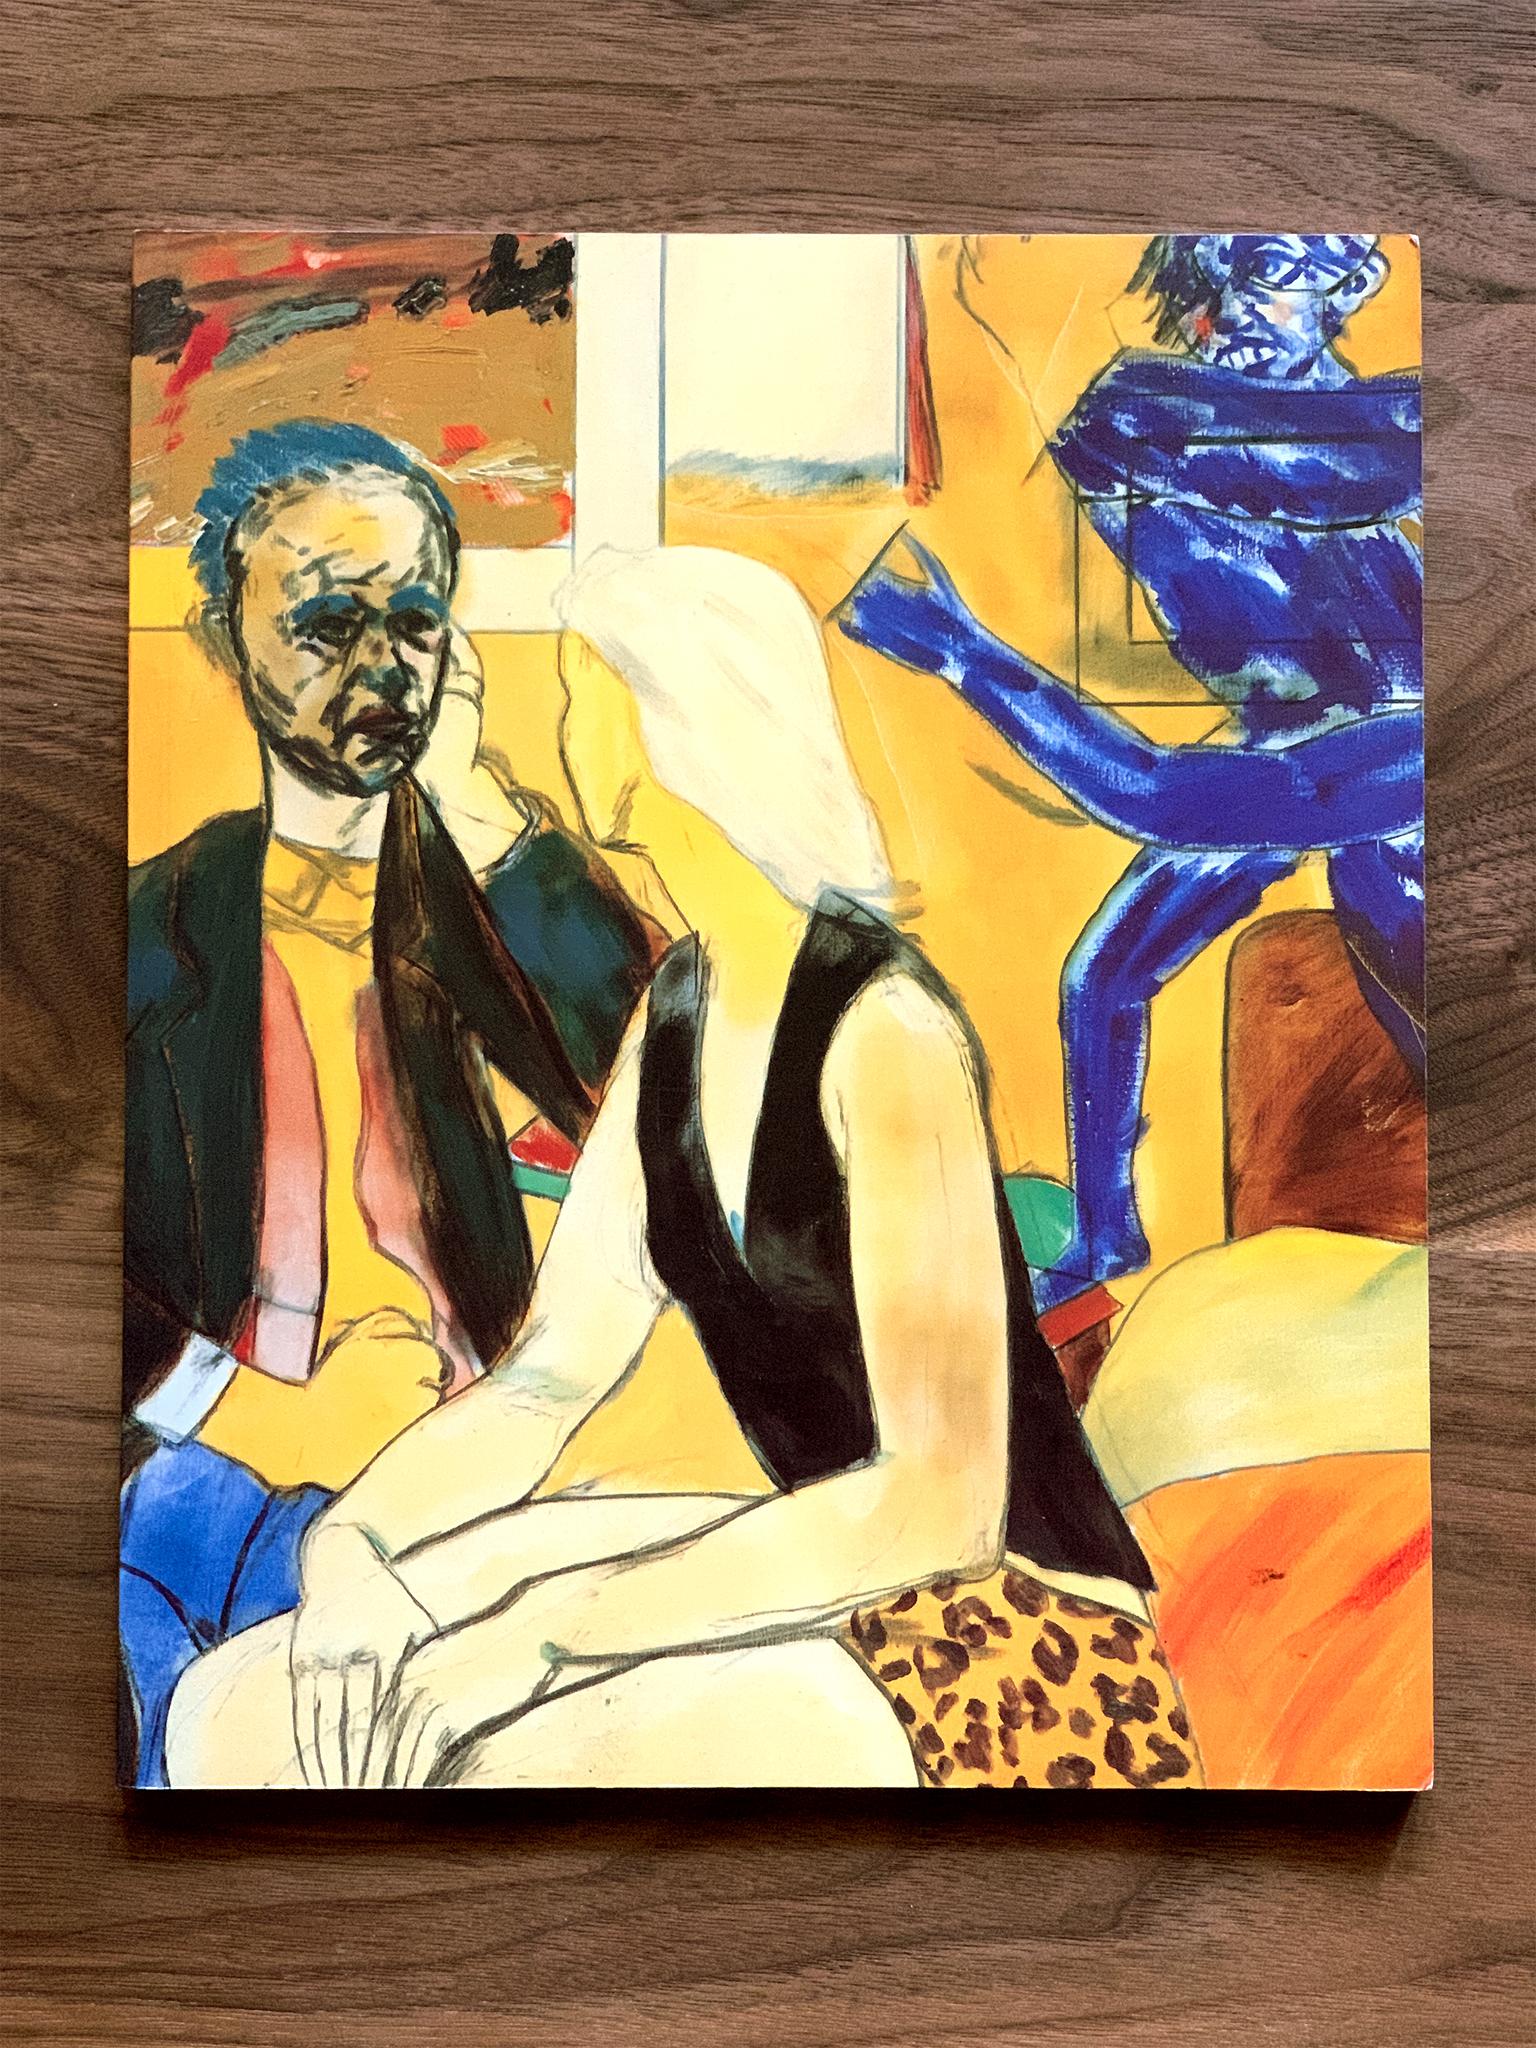 An exhibition catalogue of R.B. Kitaj's paintings and drawings from his 1995 Marlborough Gallery solo show. This is a beautiful monograph of his provocative and eccentric images reproduced here in full color. Kitaj was an American artist who counted